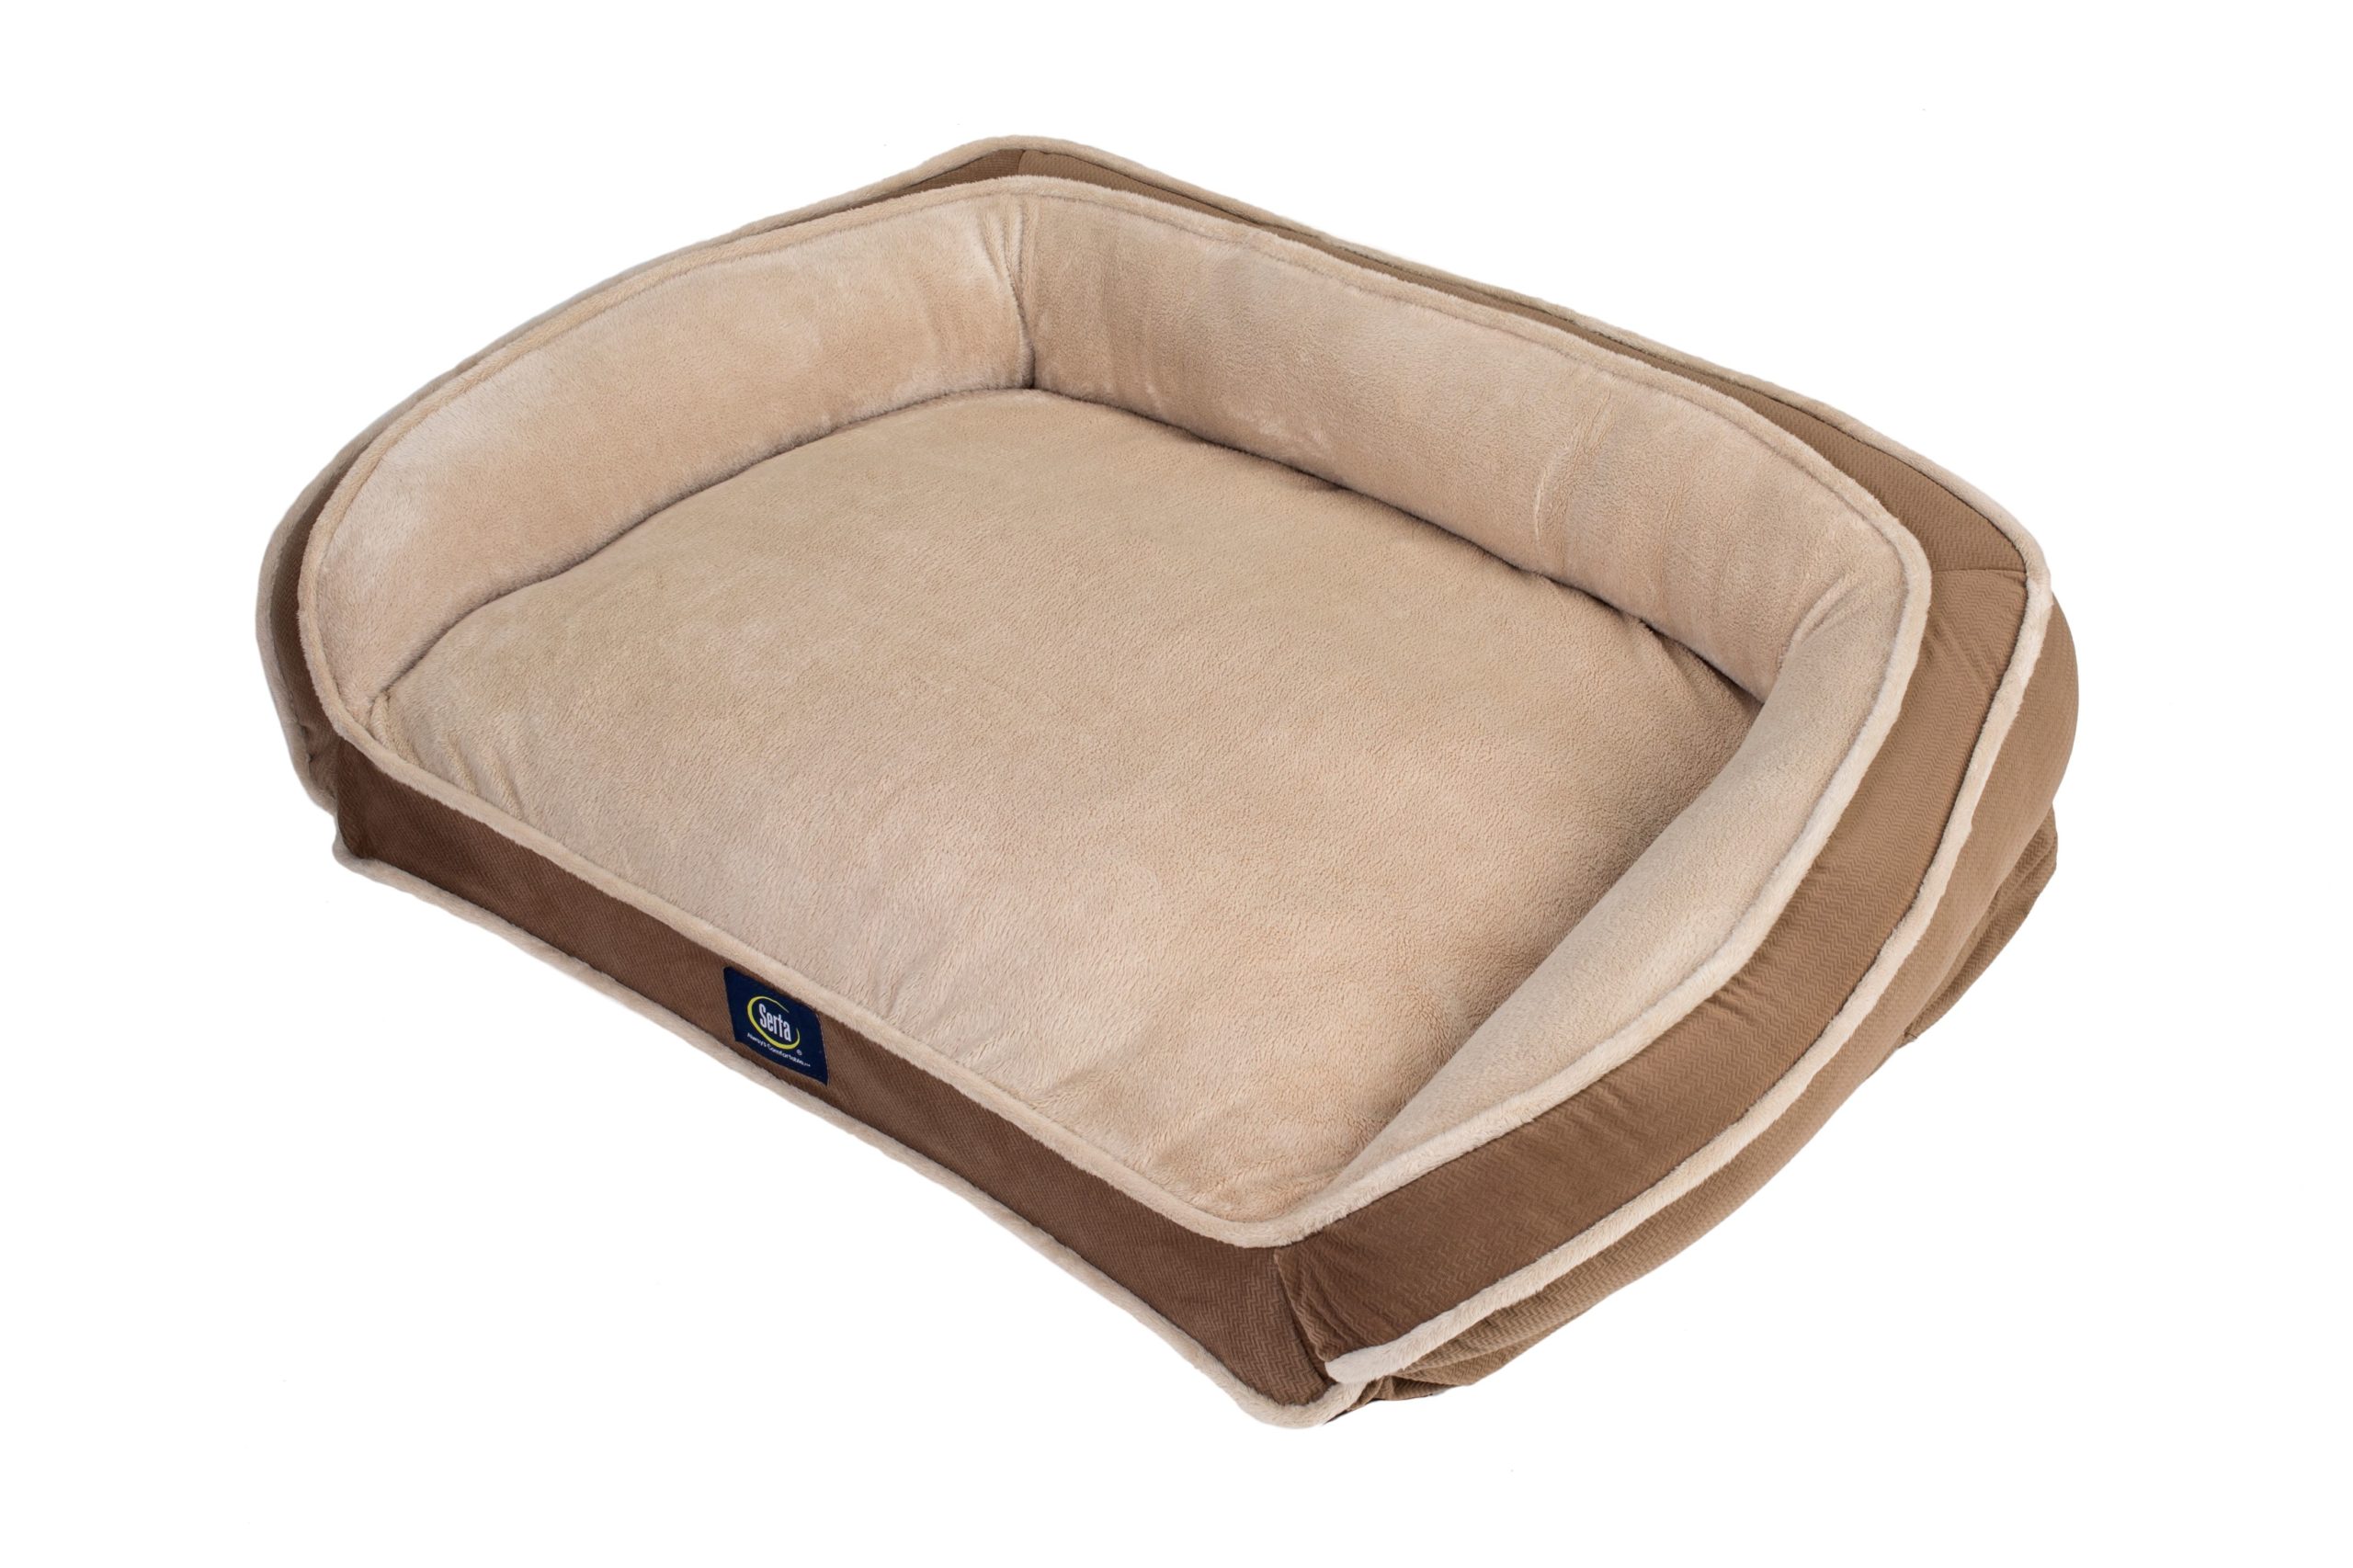 Serta Memory Foam Couch Dog Bed